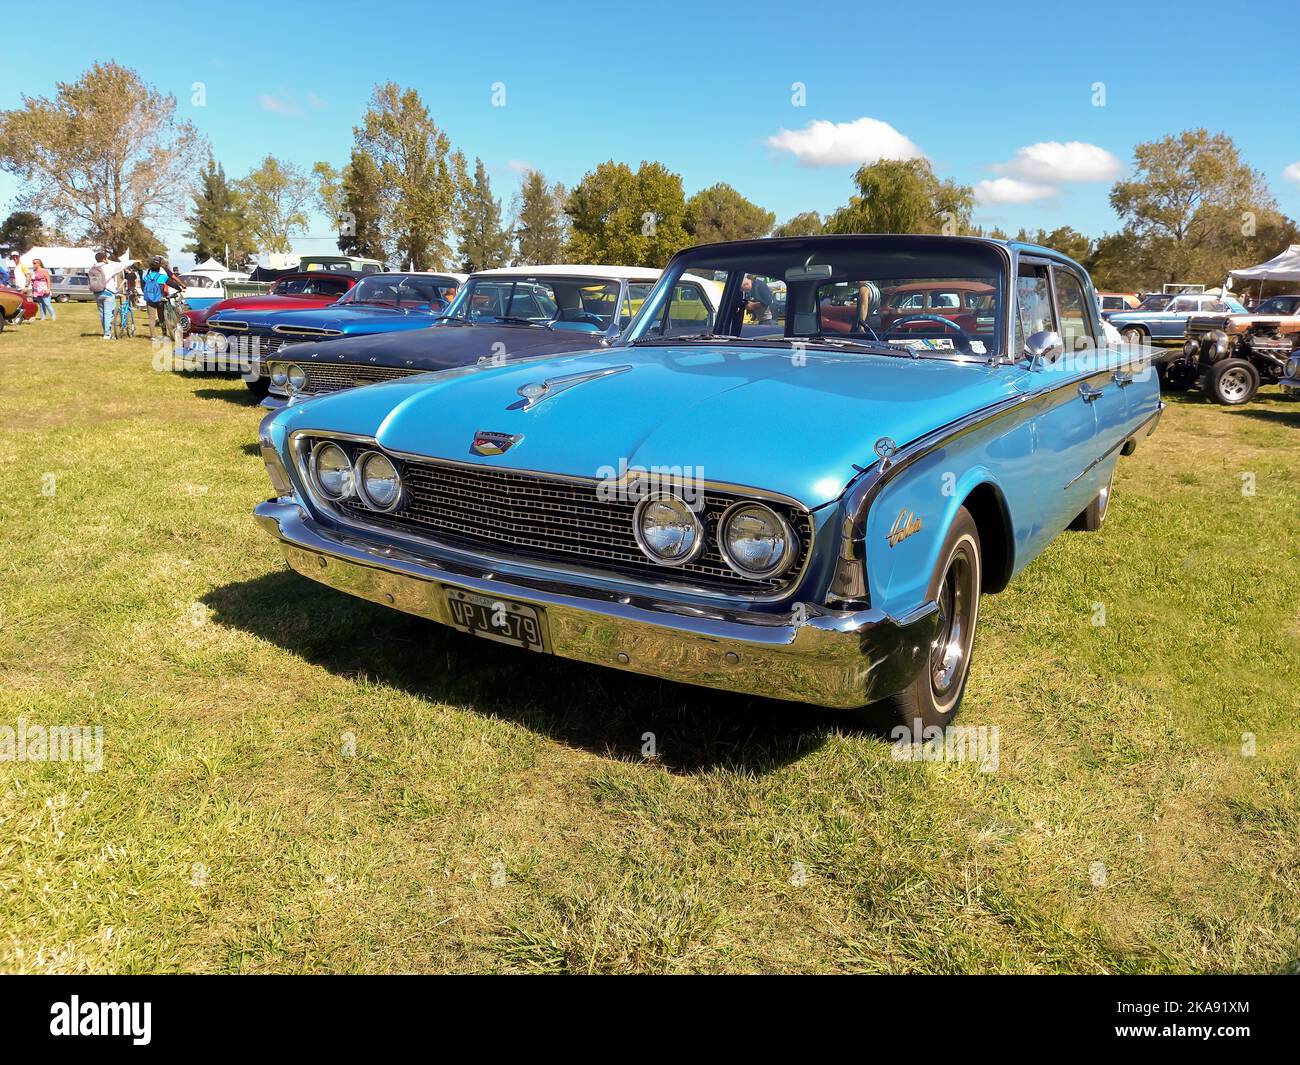 Old blue Ford Galaxie Starliner four door sedan 1970 in the countryside. Nature, grass, trees. Classic car show. Copyspace Stock Photo